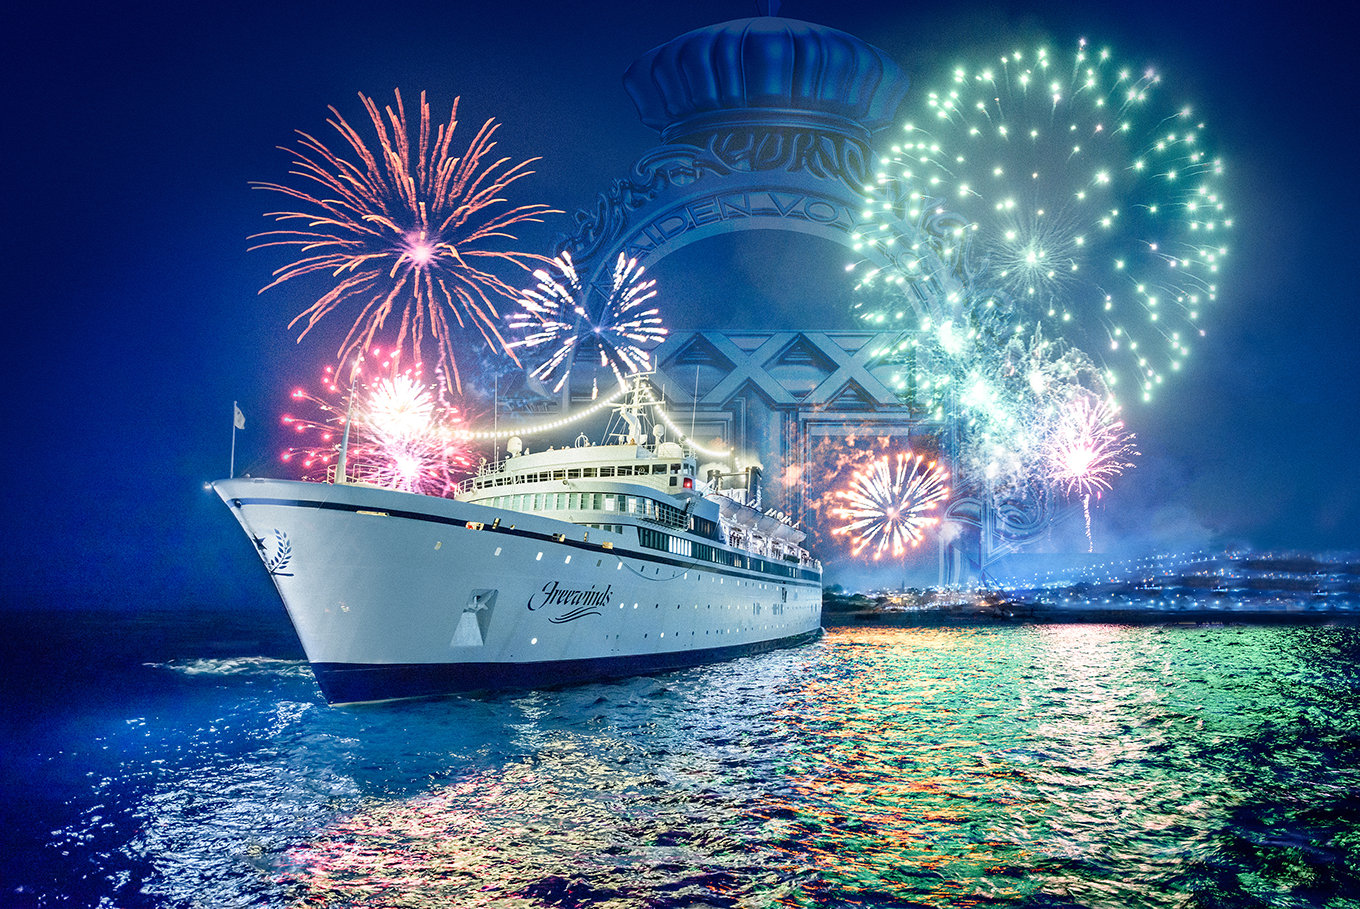 Infinite Possibility The Freewinds 31st Maiden Voyage Anniversary Celebrates Exceptional Year Of Global Advancement